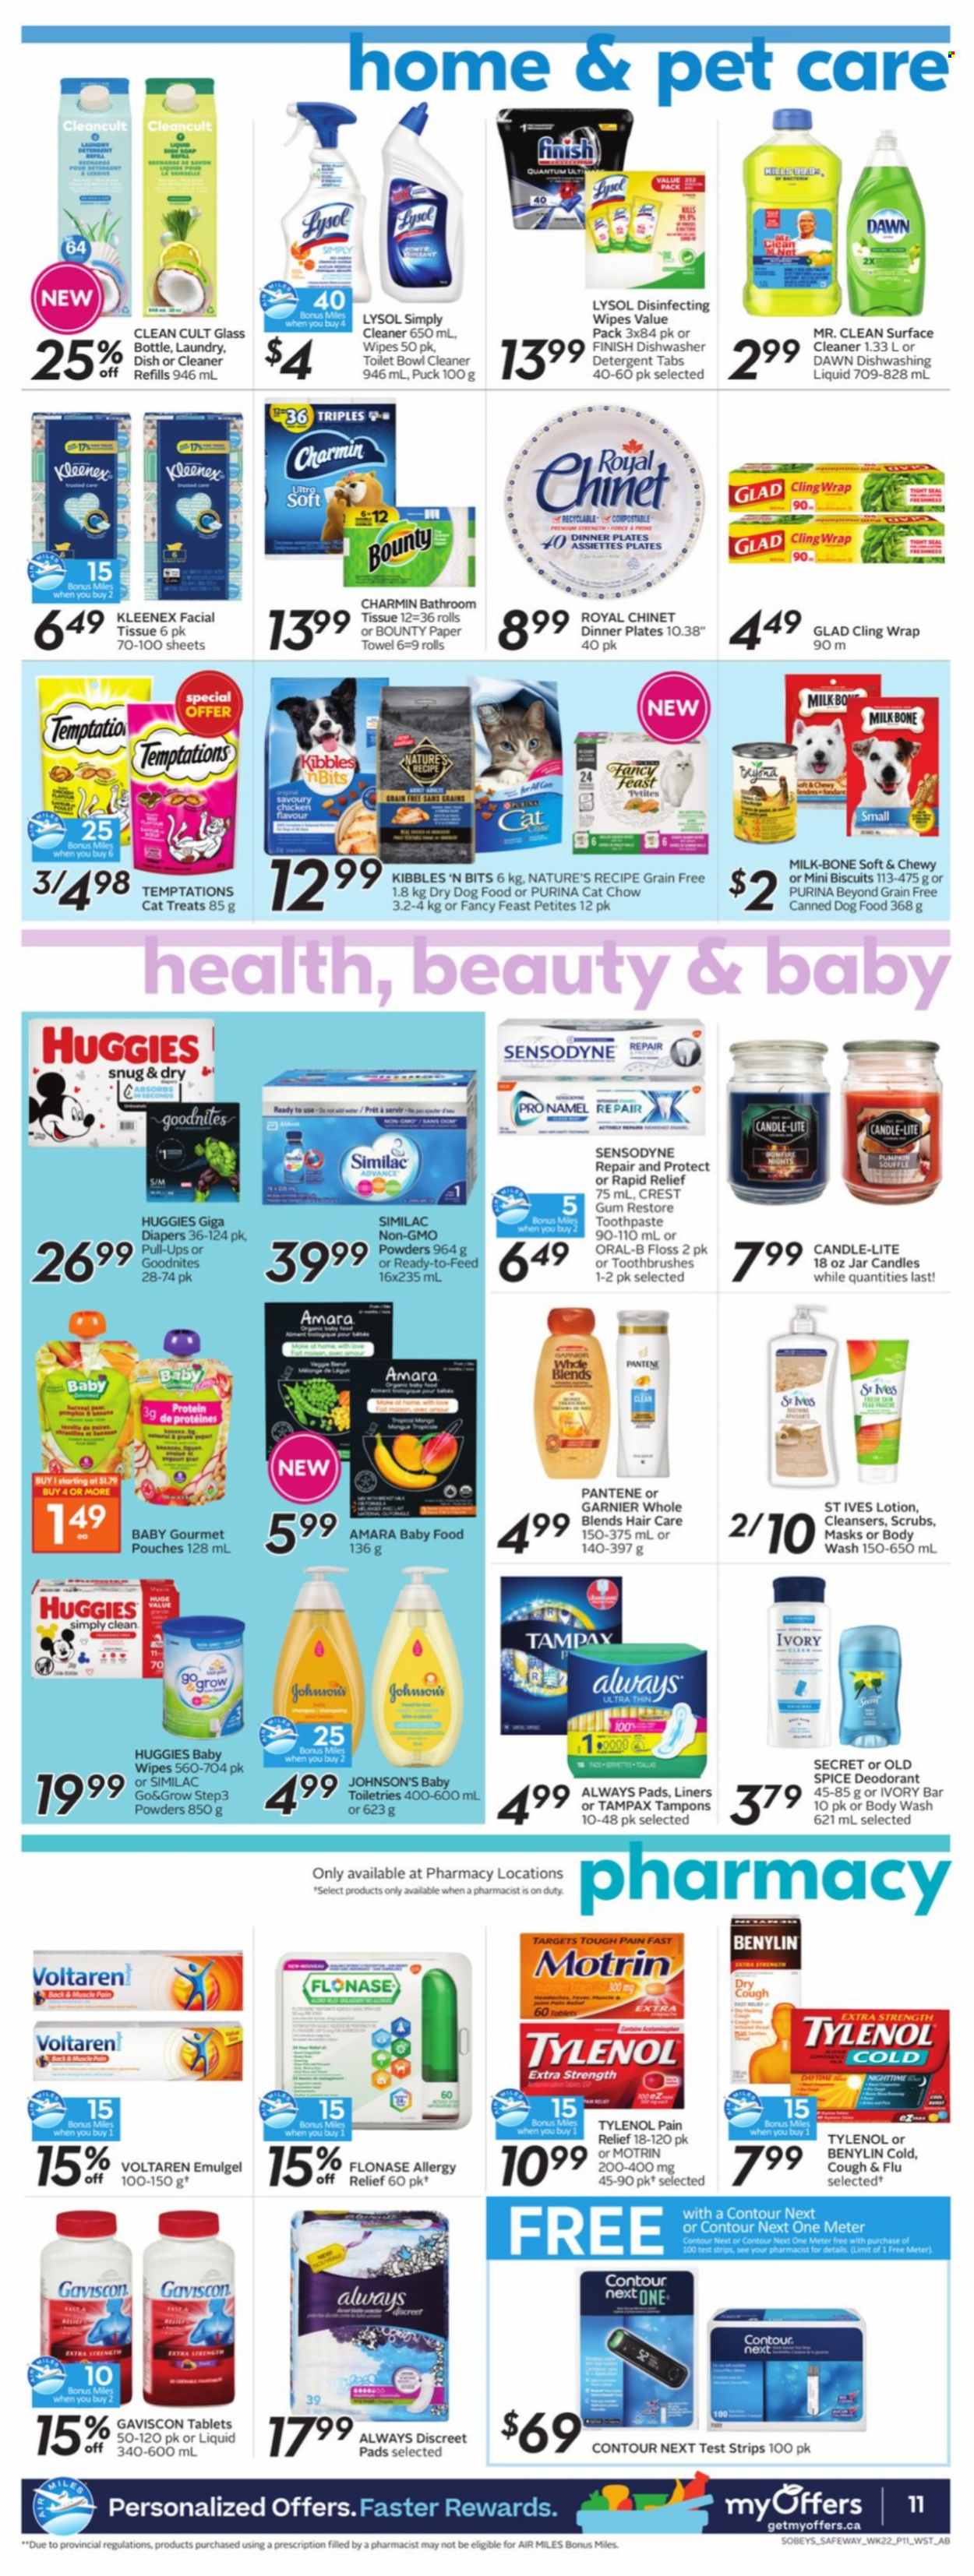 thumbnail - Safeway Flyer - September 23, 2021 - September 29, 2021 - Sales products - Puck, milk, Bounty, biscuit, spice, Similac, wipes, baby wipes, nappies, Johnson's, bath tissue, Kleenex, paper towels, Charmin, surface cleaner, cleaner, Lysol, dishwashing liquid, Finish Powerball, Finish Quantum Ultimate, body wash, toothpaste, Crest, Always pads, sanitary pads, Always Discreet, tampons, body lotion, anti-perspirant, contour, animal food, dog food, Purina, dry dog food, Fancy Feast, pain relief, Tylenol, Gaviscon, Benylin, Motrin, detergent, Garnier, Tampax, Huggies, Pantene, Old Spice, Oral-B, Sensodyne, deodorant. Page 11.